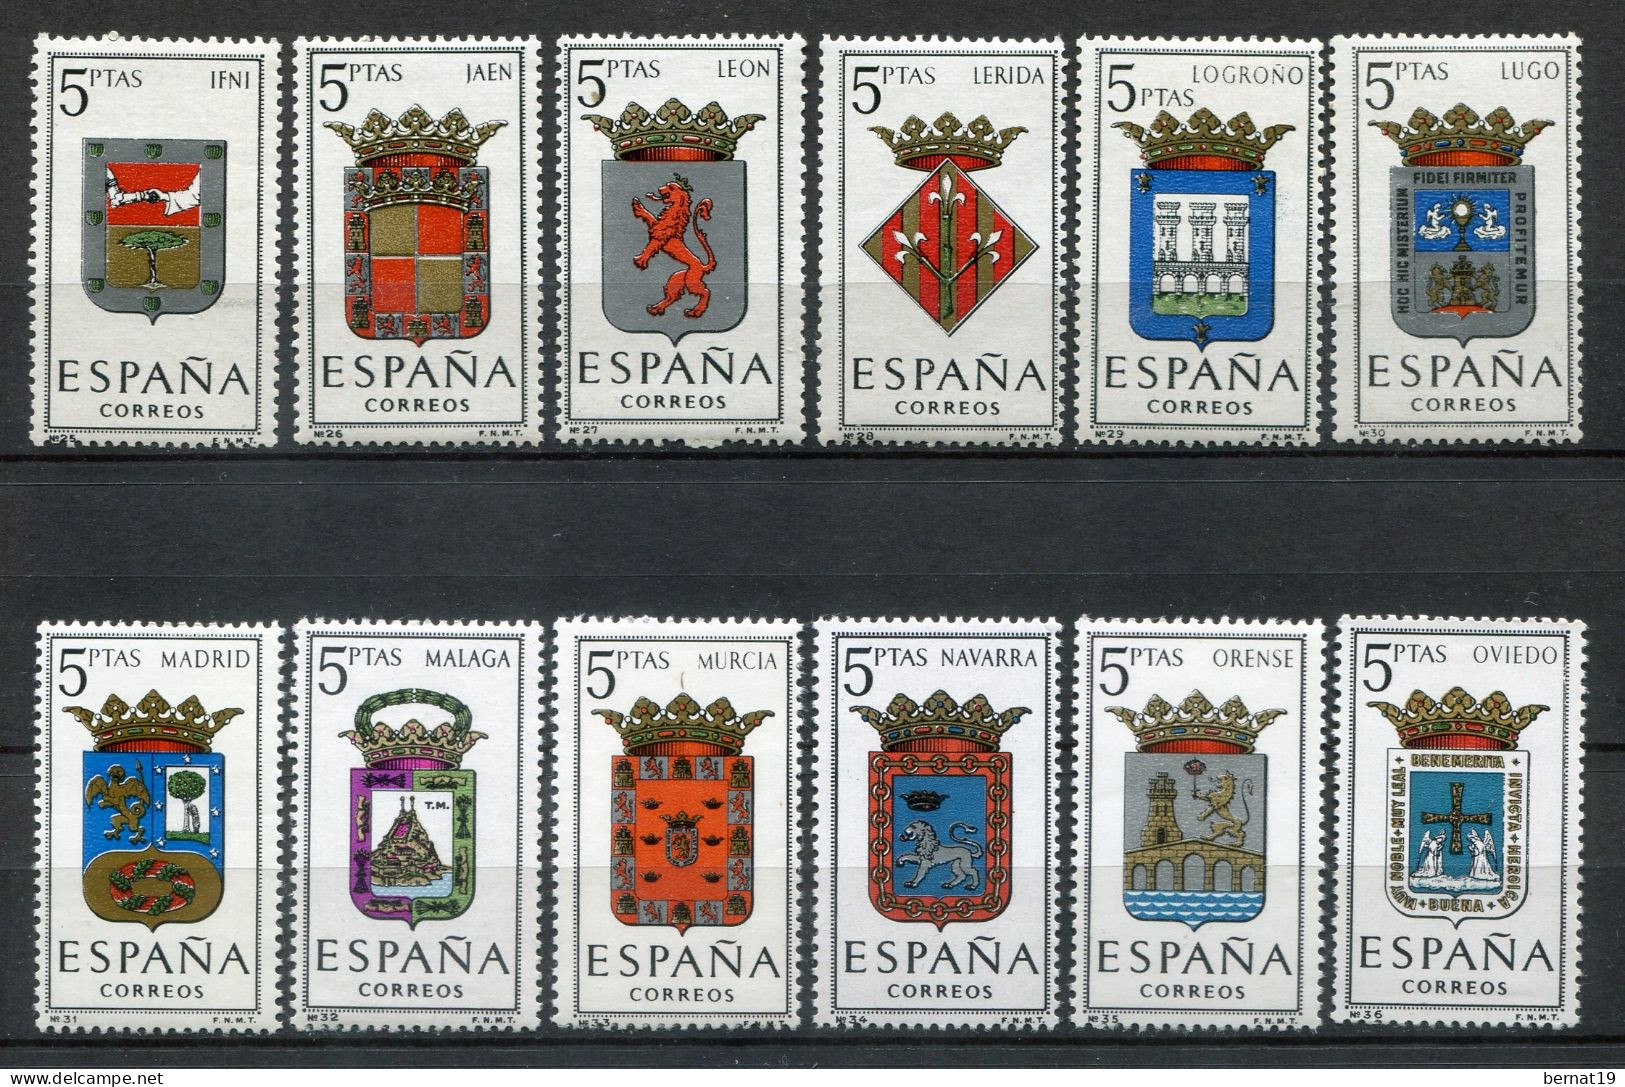 Spain 1960-1964 FIVE complete years ** MNH.